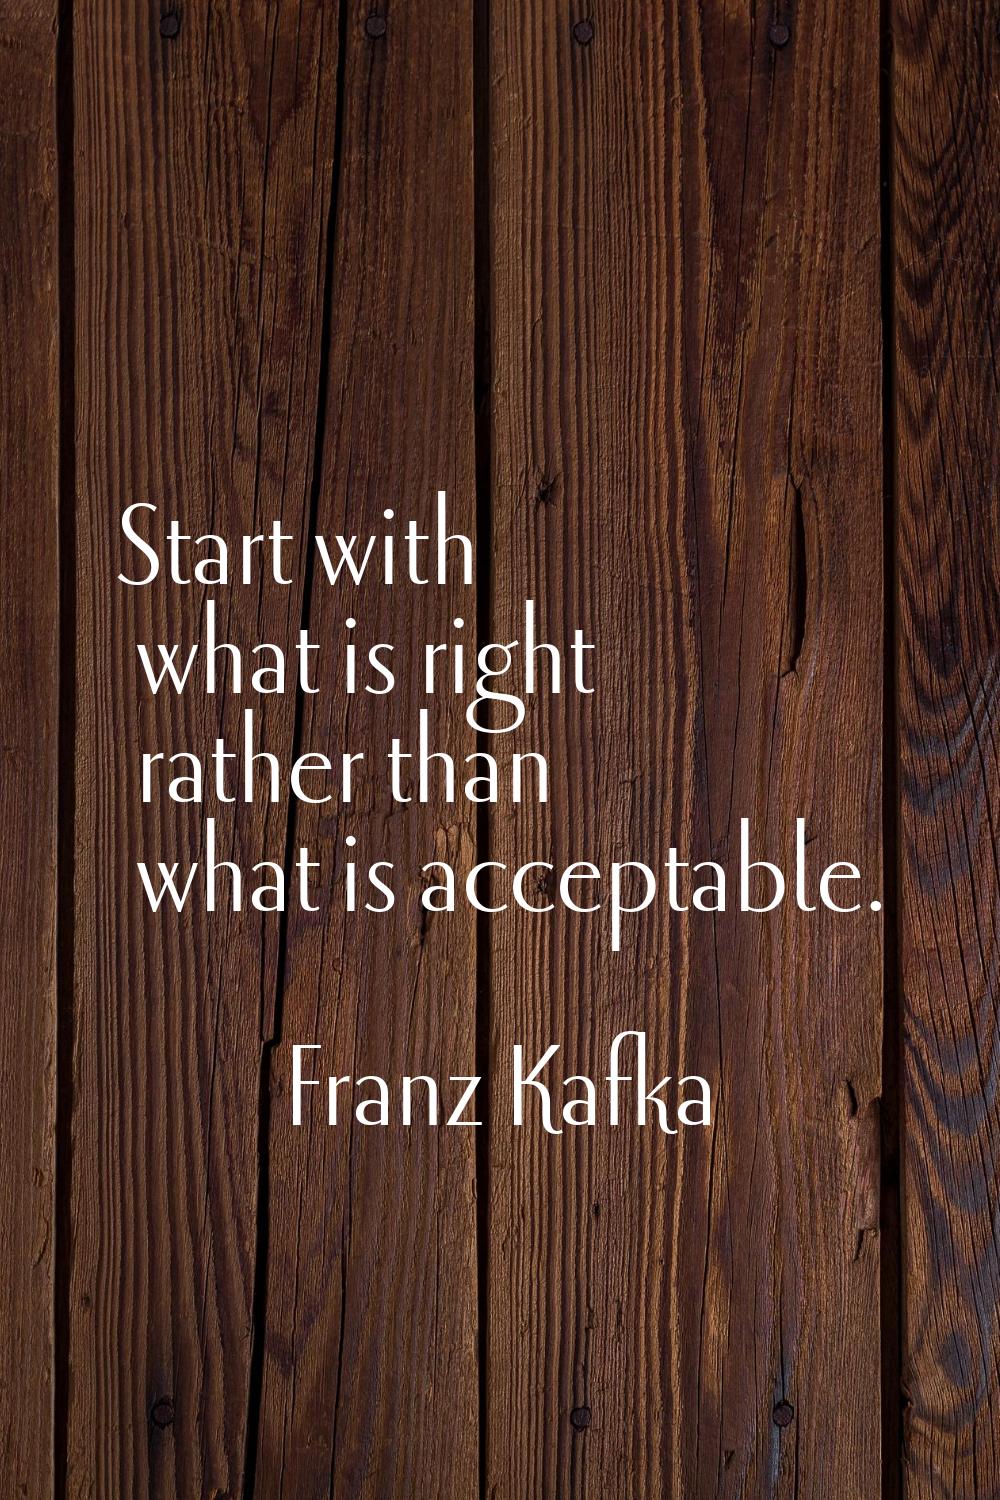 Start with what is right rather than what is acceptable.